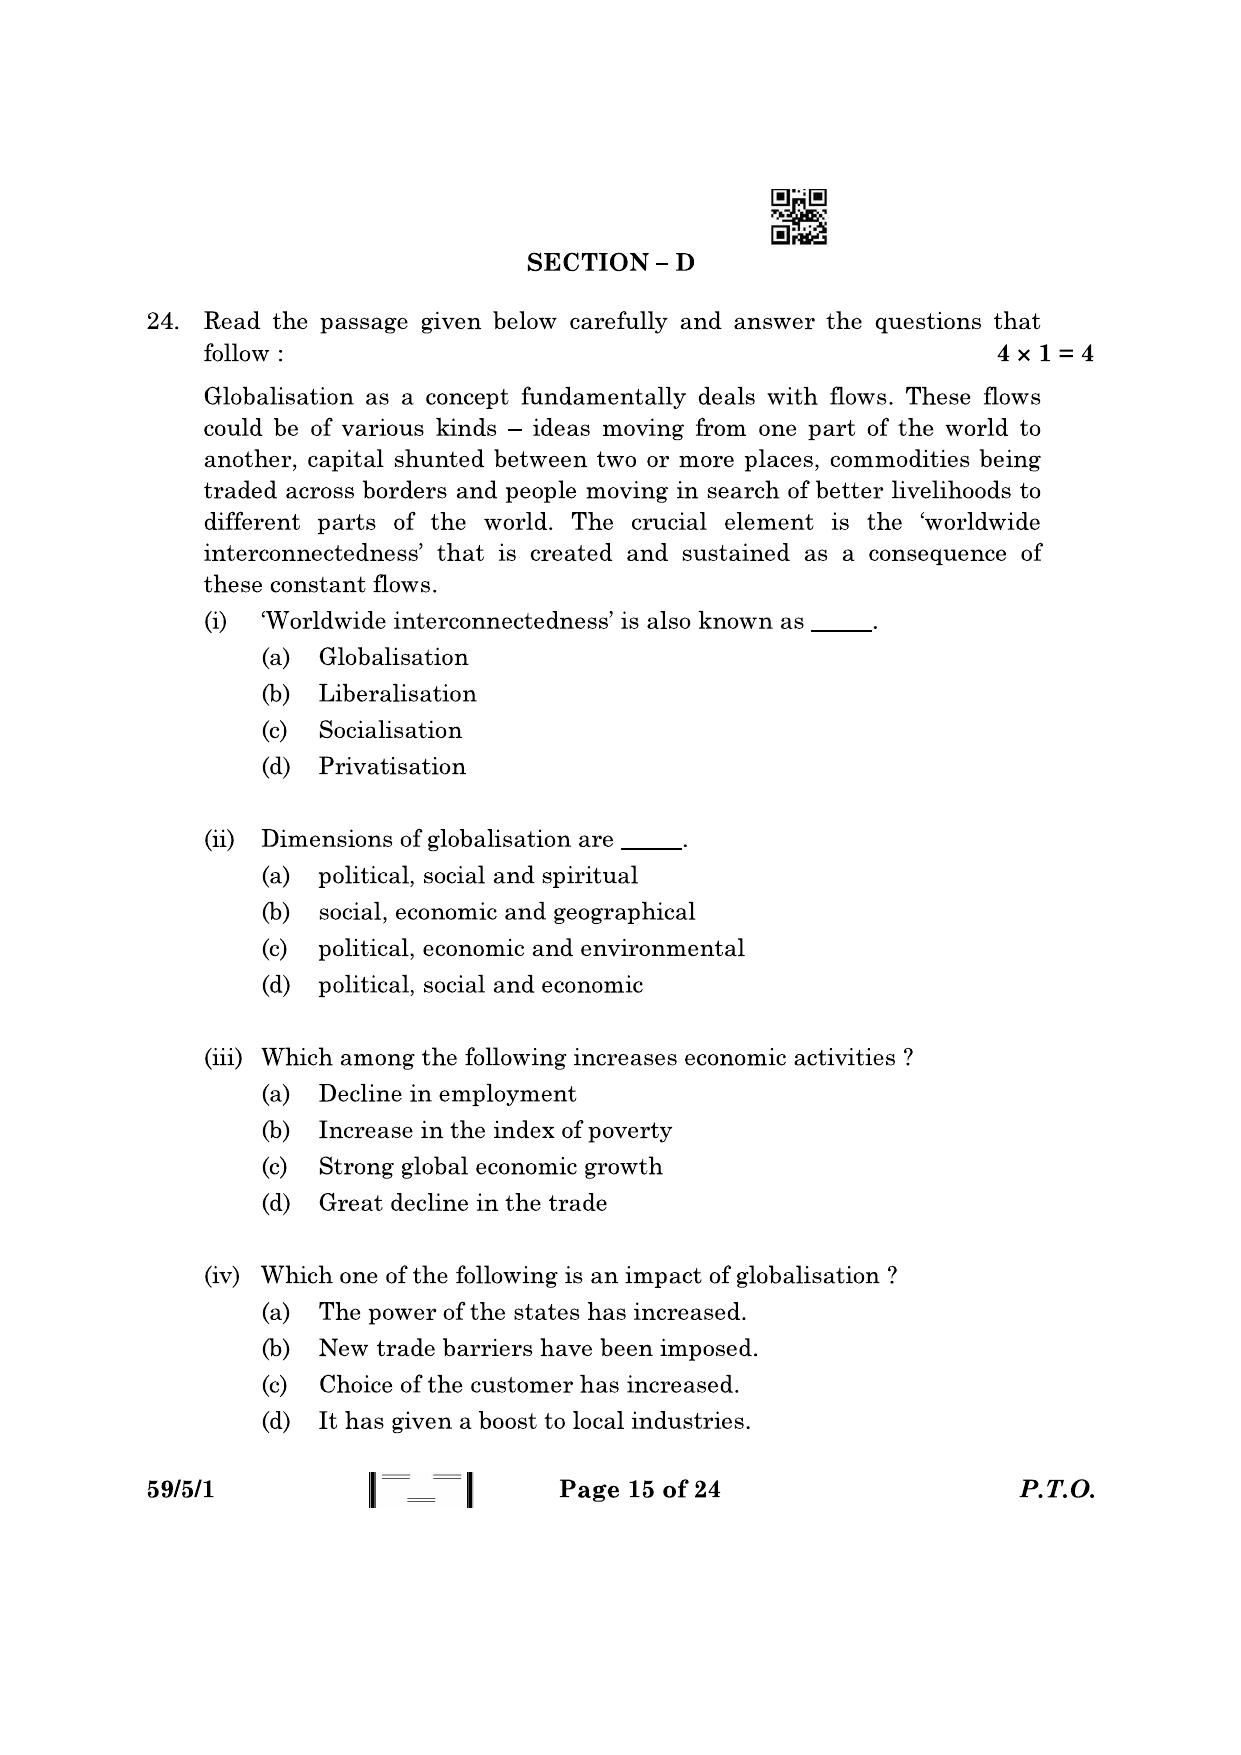 CBSE Class 12 59-5-1 Political Science 2023 Question Paper - Page 15